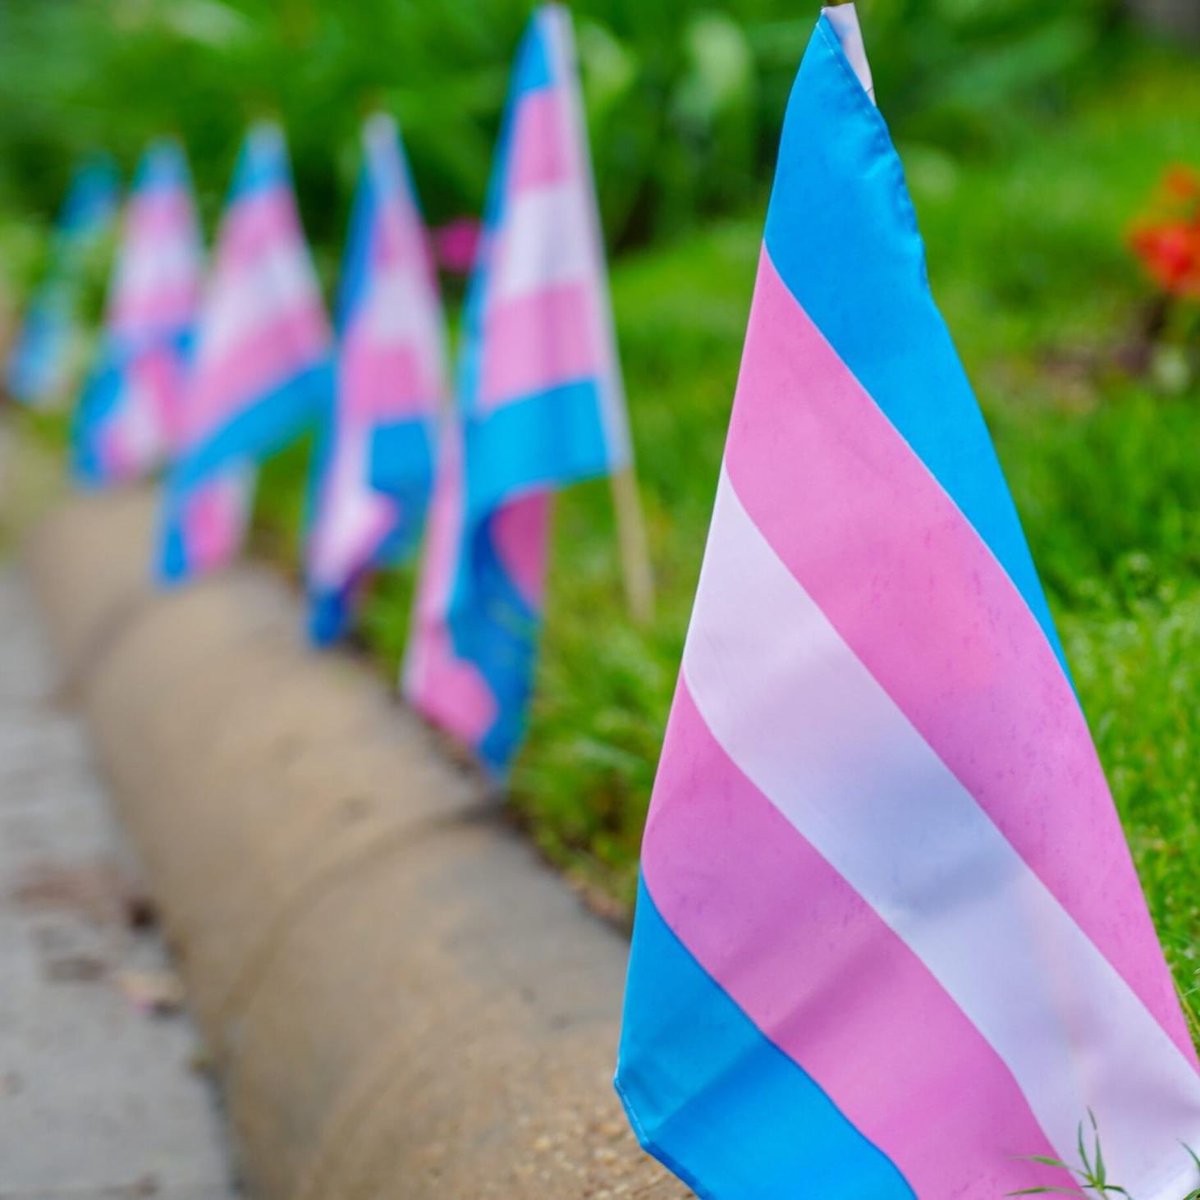 Every year on March 31st, the world celebrates #tdov. We celebrate the lives and contributions of our trans family and community, all while recognizing the work we all have to do in securing their safety and livelihood which is constantly under attack.